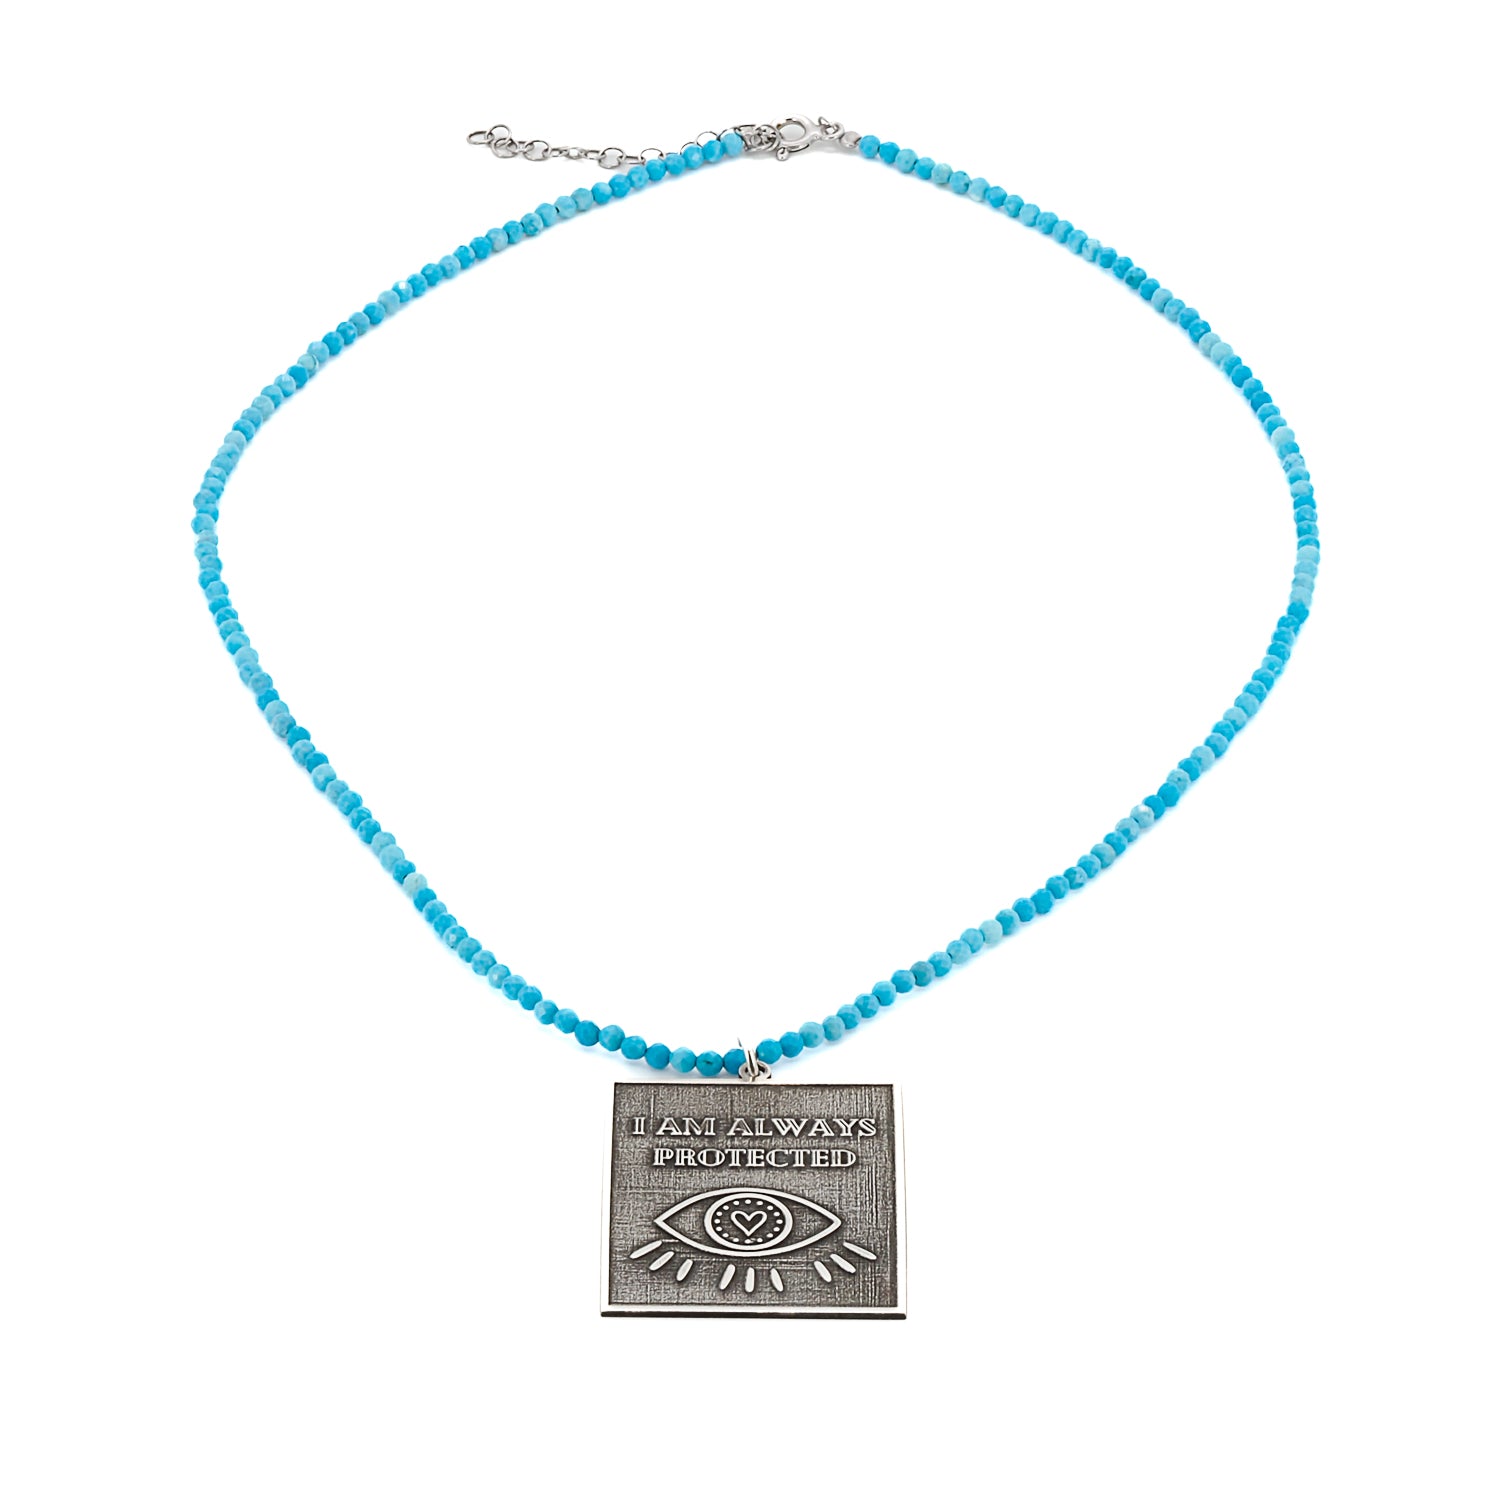 The sterling silver square pendant of the Turquoise 'I Am Always Protected' Necklace